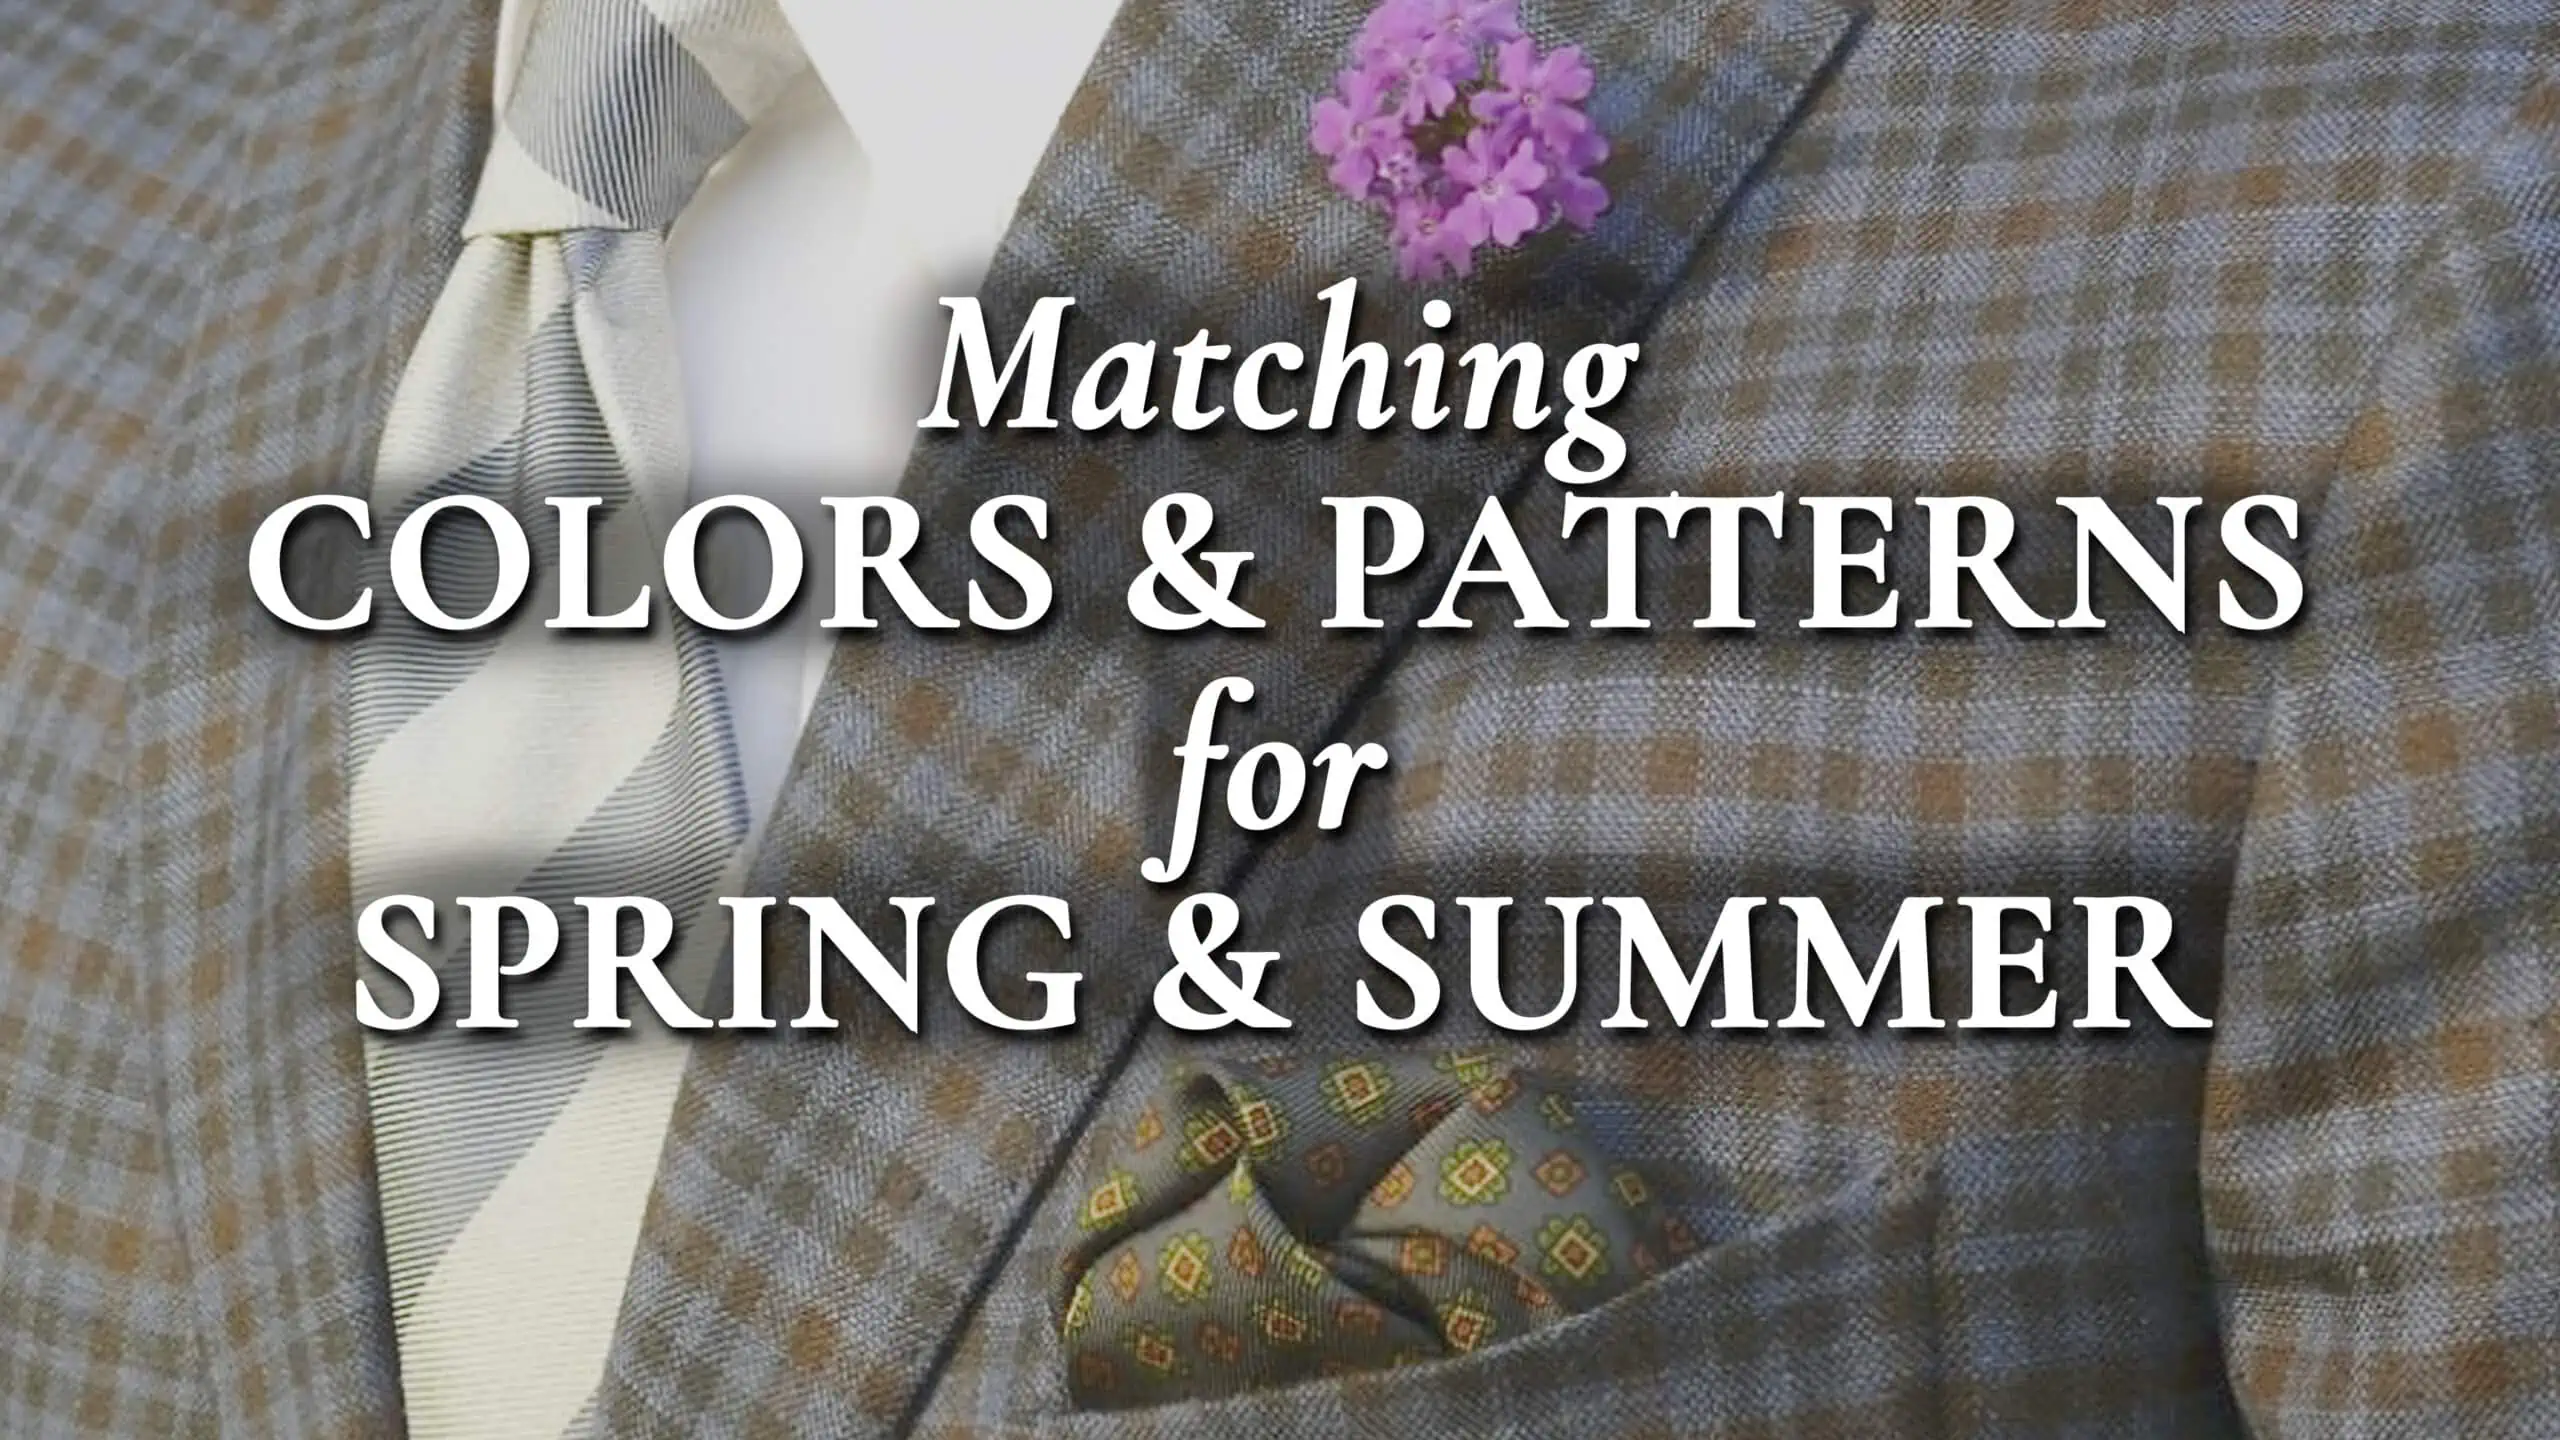 https://www.gentlemansgazette.com/wp-content/uploads/2017/05/how-to-match-colors-patterns_3840x2160_wp-scaled.webp